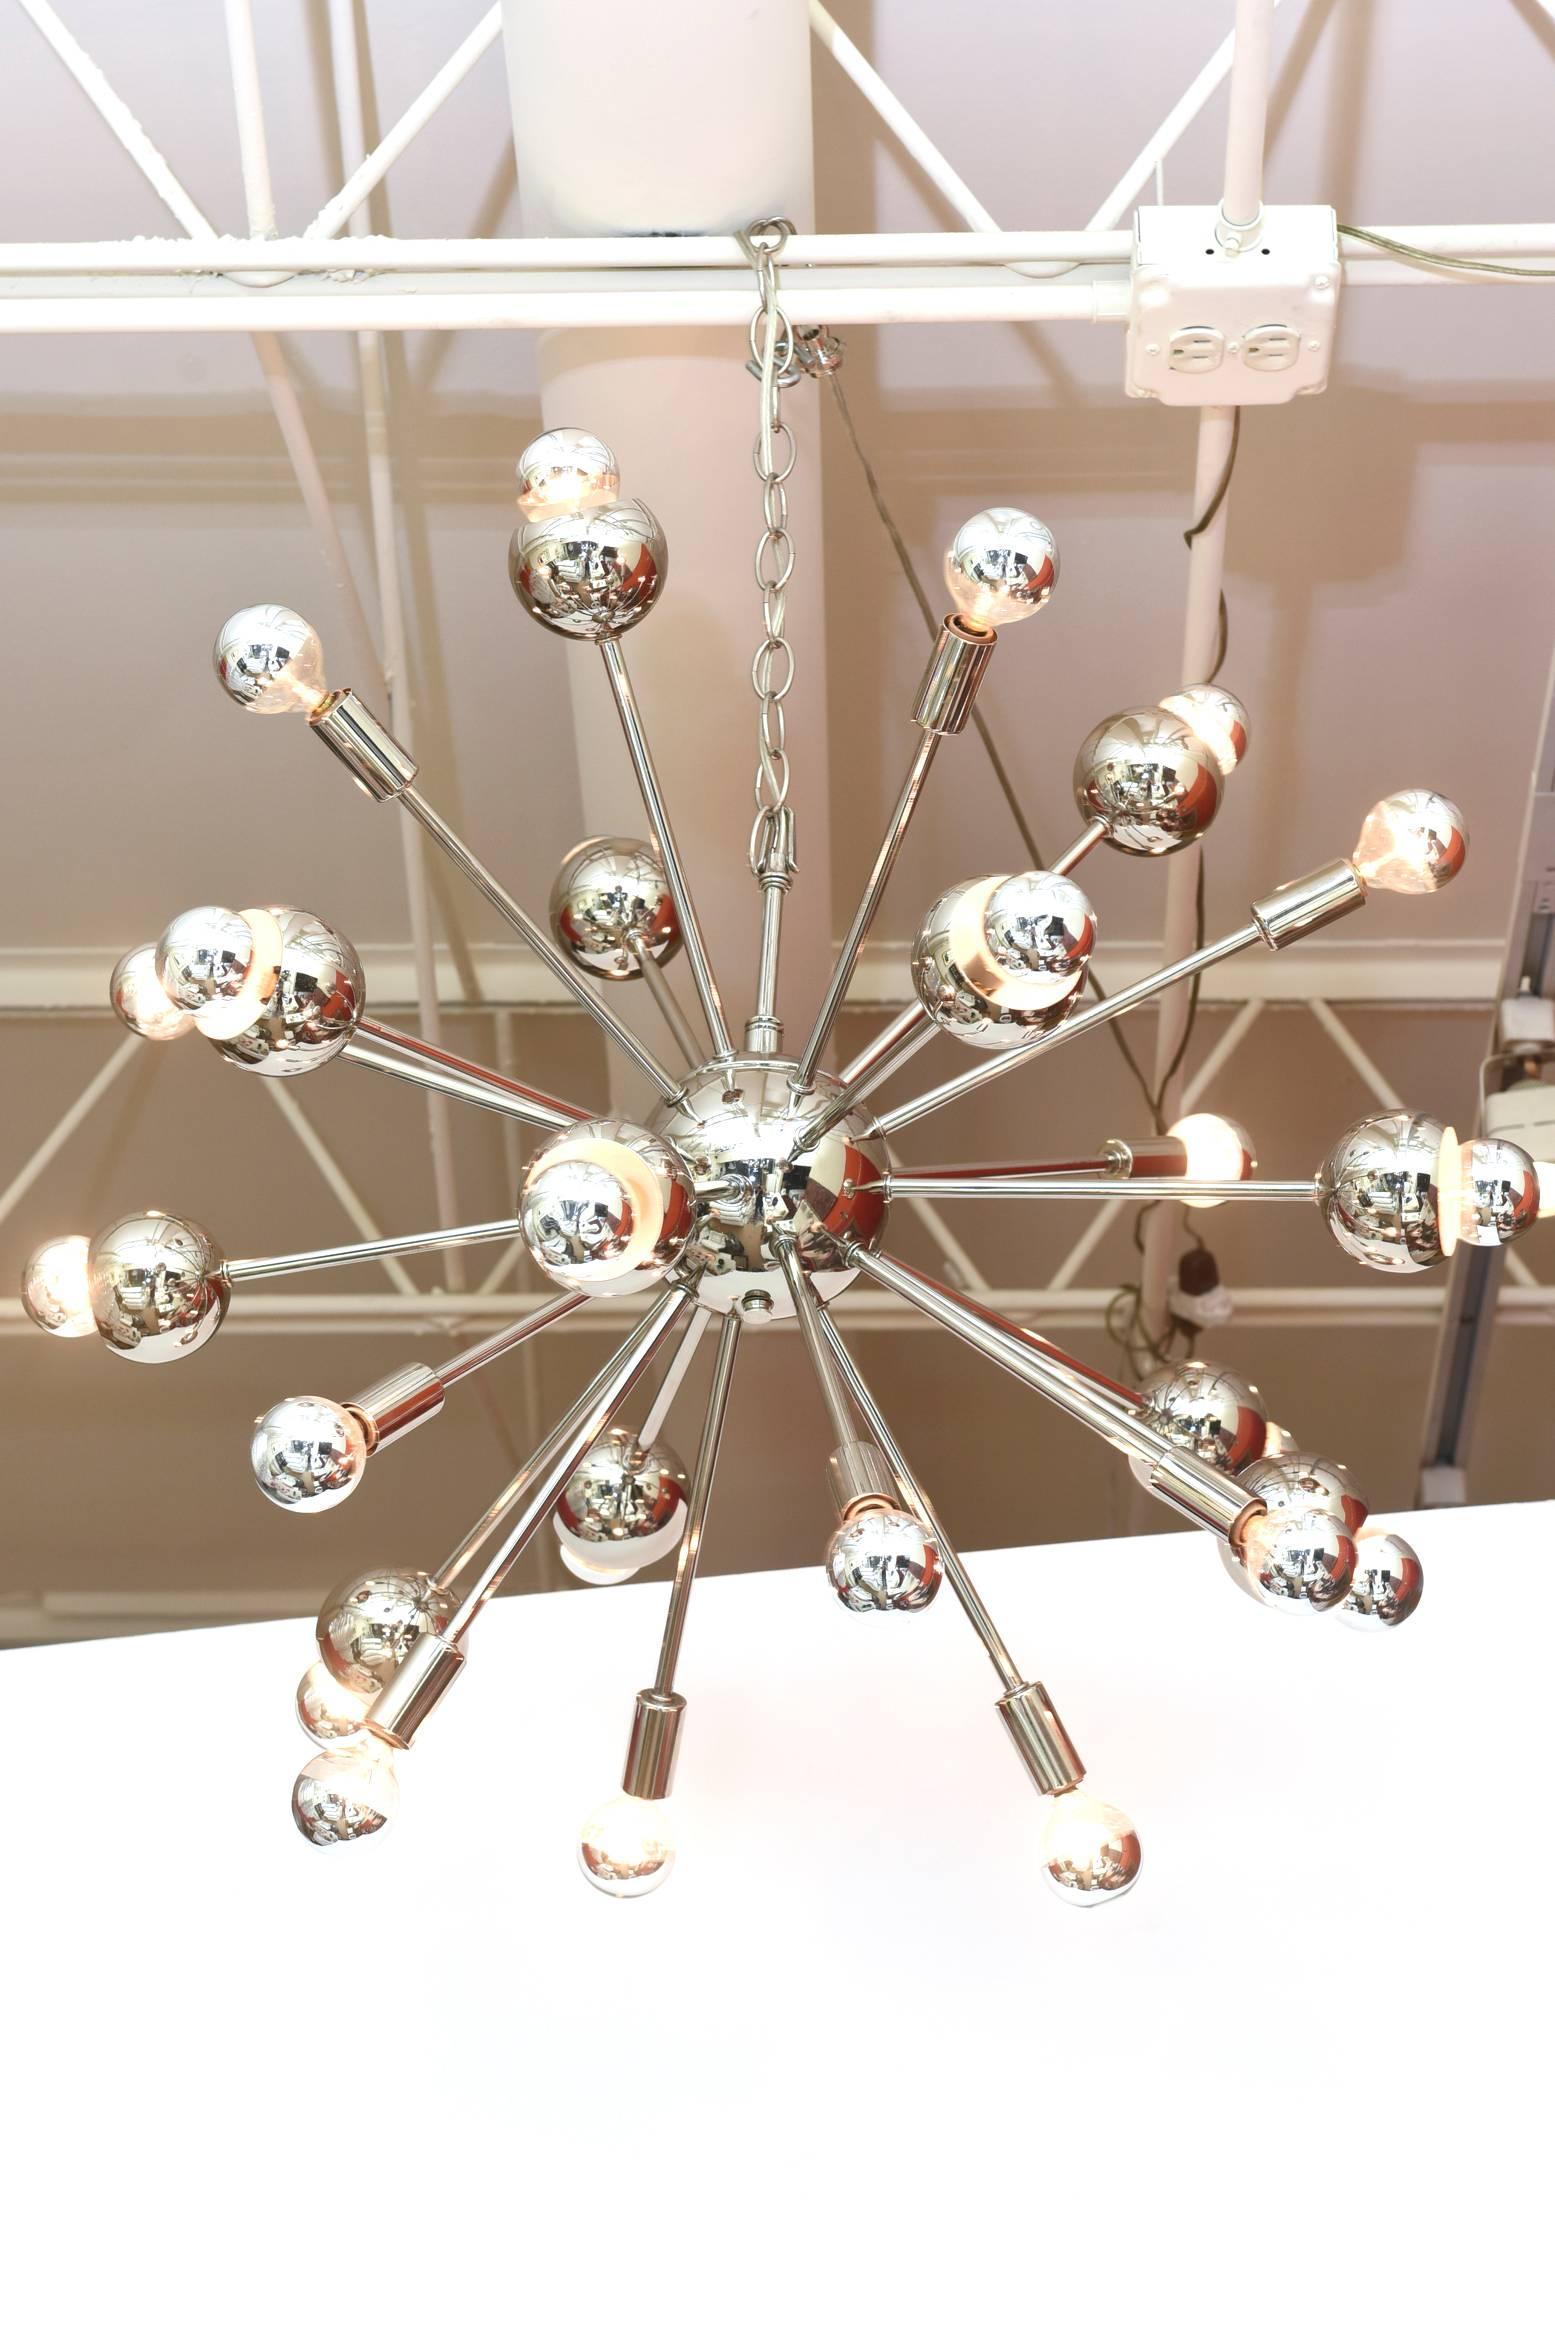 This many arm of 24 bulb sputnik chandelier has been re-nickled silver and rewired. There are of different lengths of the bulbs making it more sculptural It has gone through a complete restoration. It is vintage and from the 60's. The special bulbs